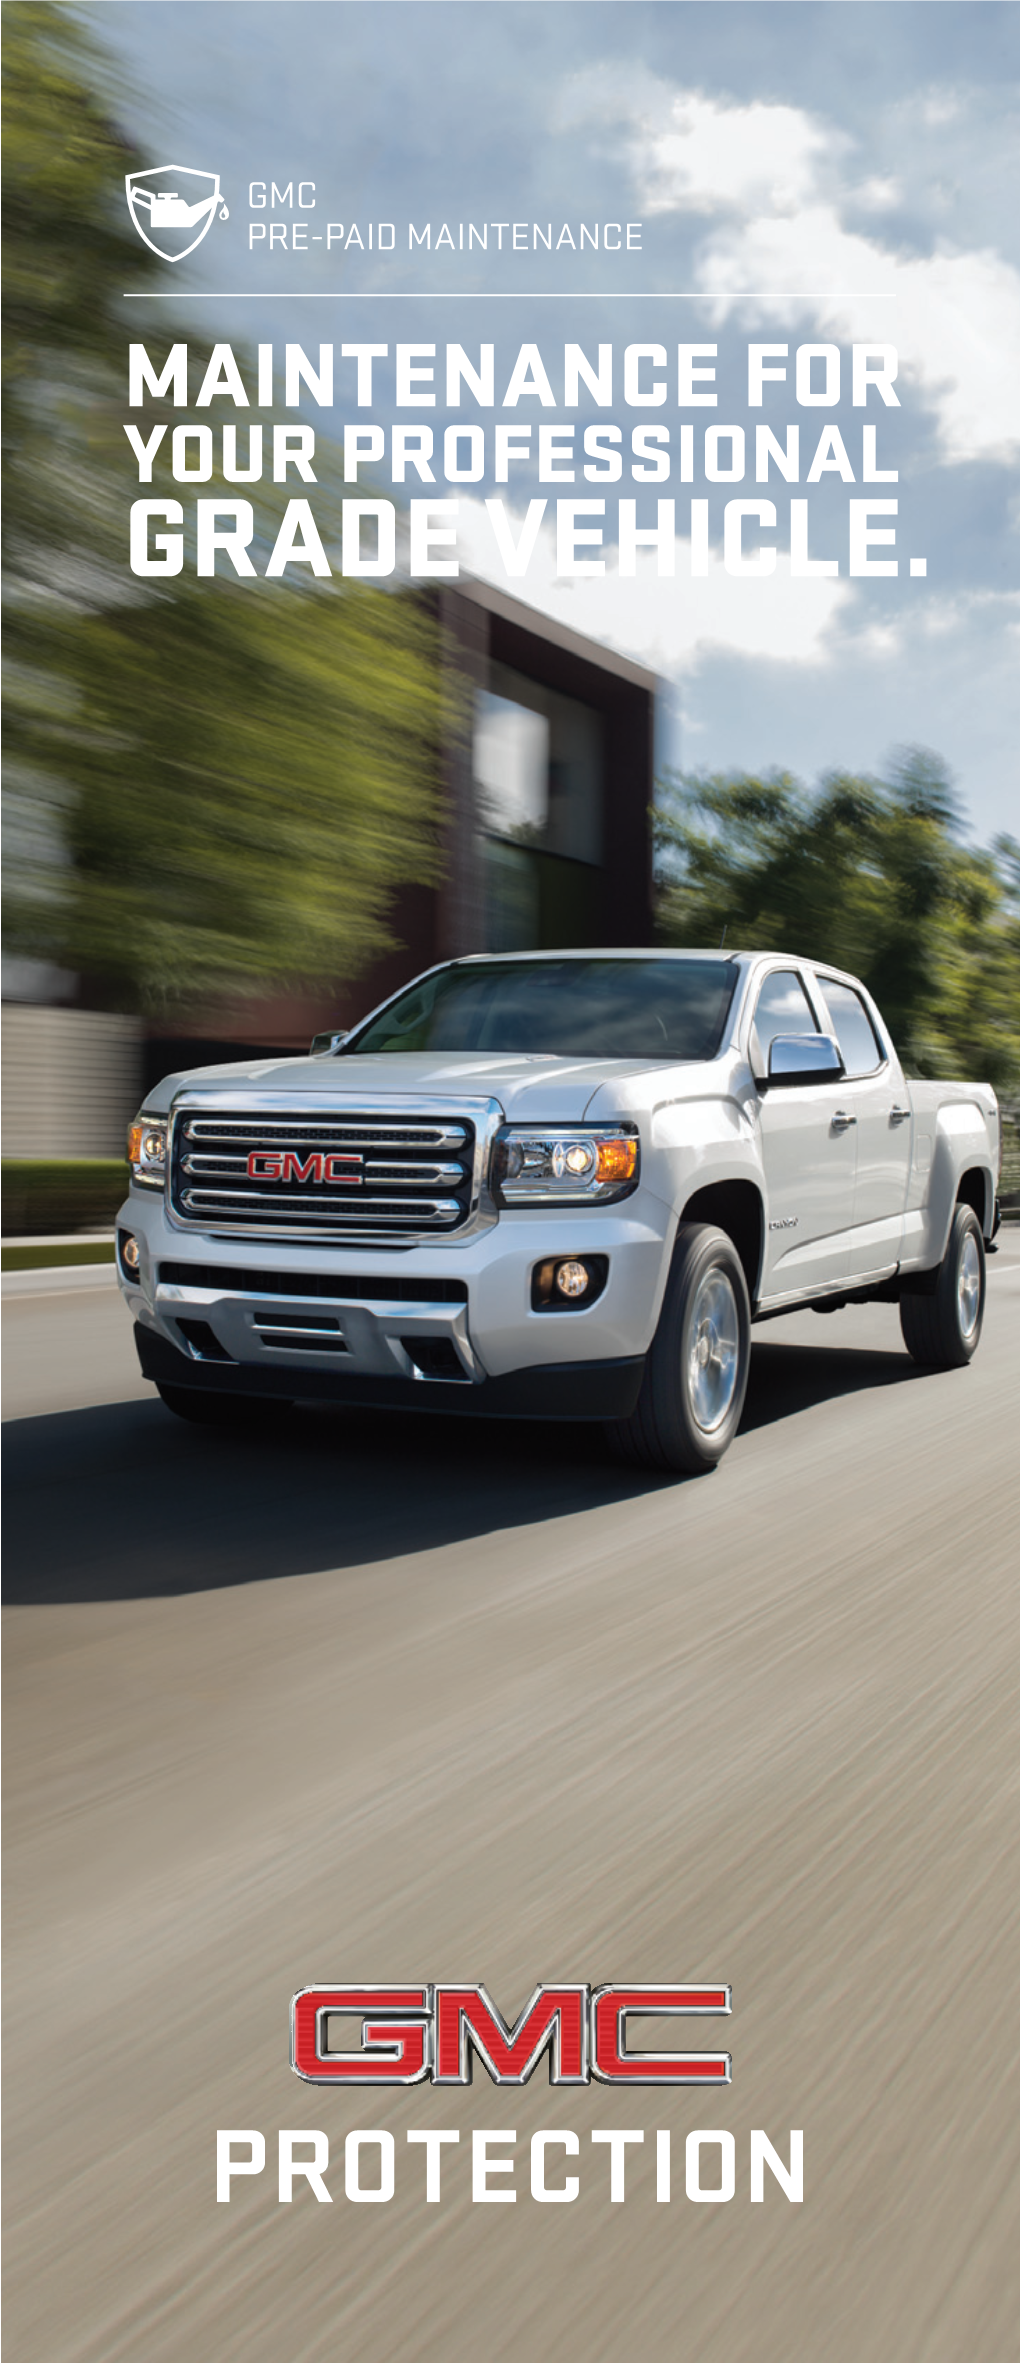 Grade Vehicle. Help Maintain Your Gmc’S Precise Standards